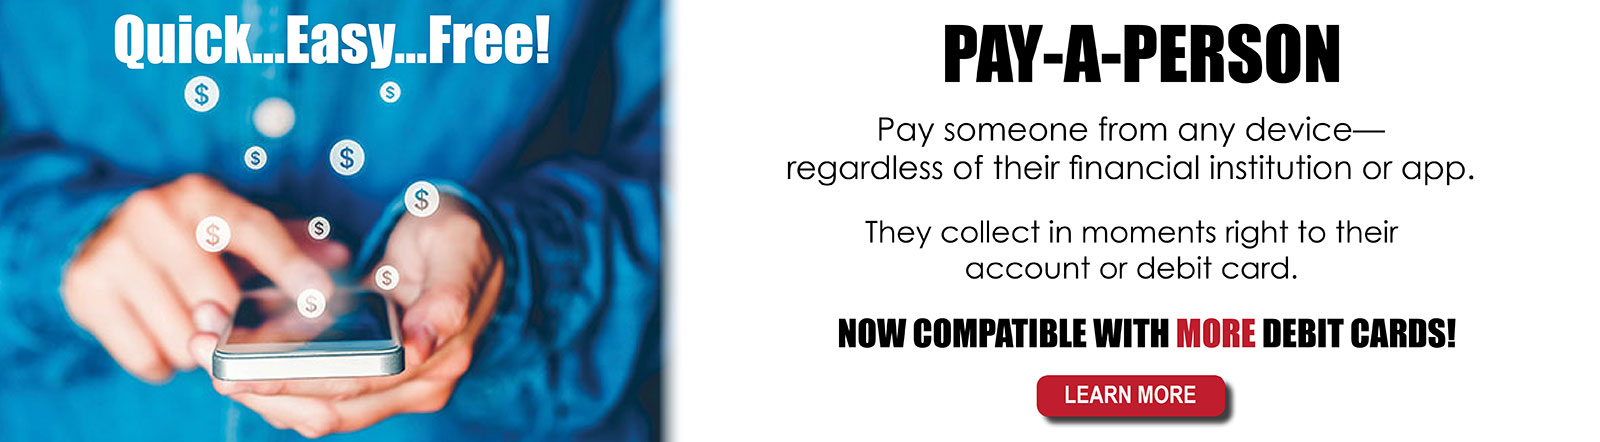 Pay-A-Person, the free payment app, is now compatible with more debit cards.